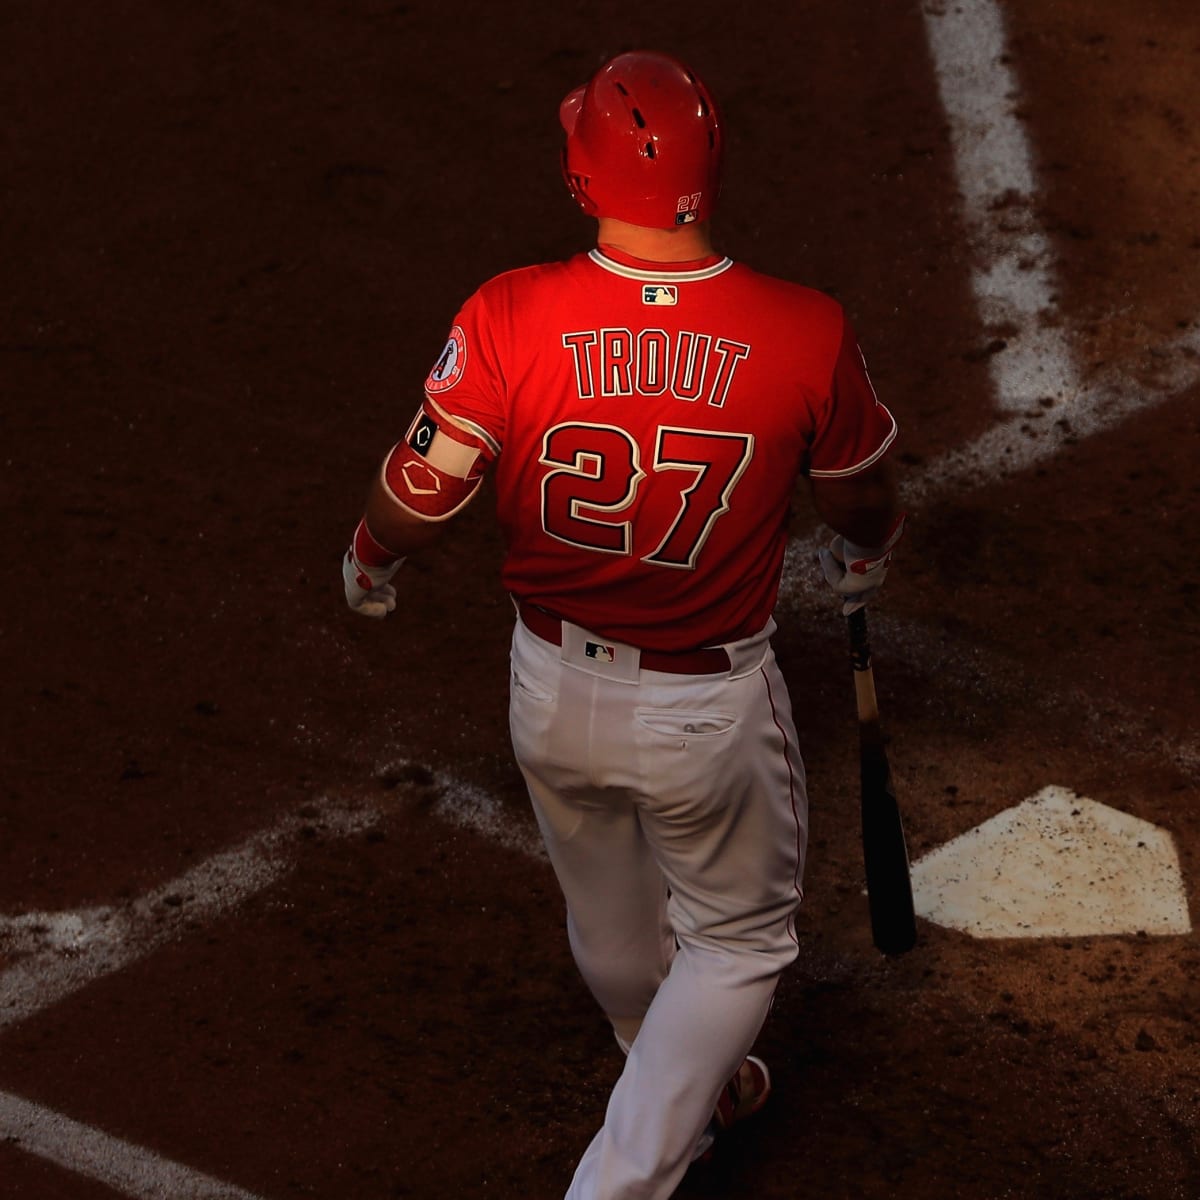 Mike Trout home run can't save Angels in loss to Orioles - Los